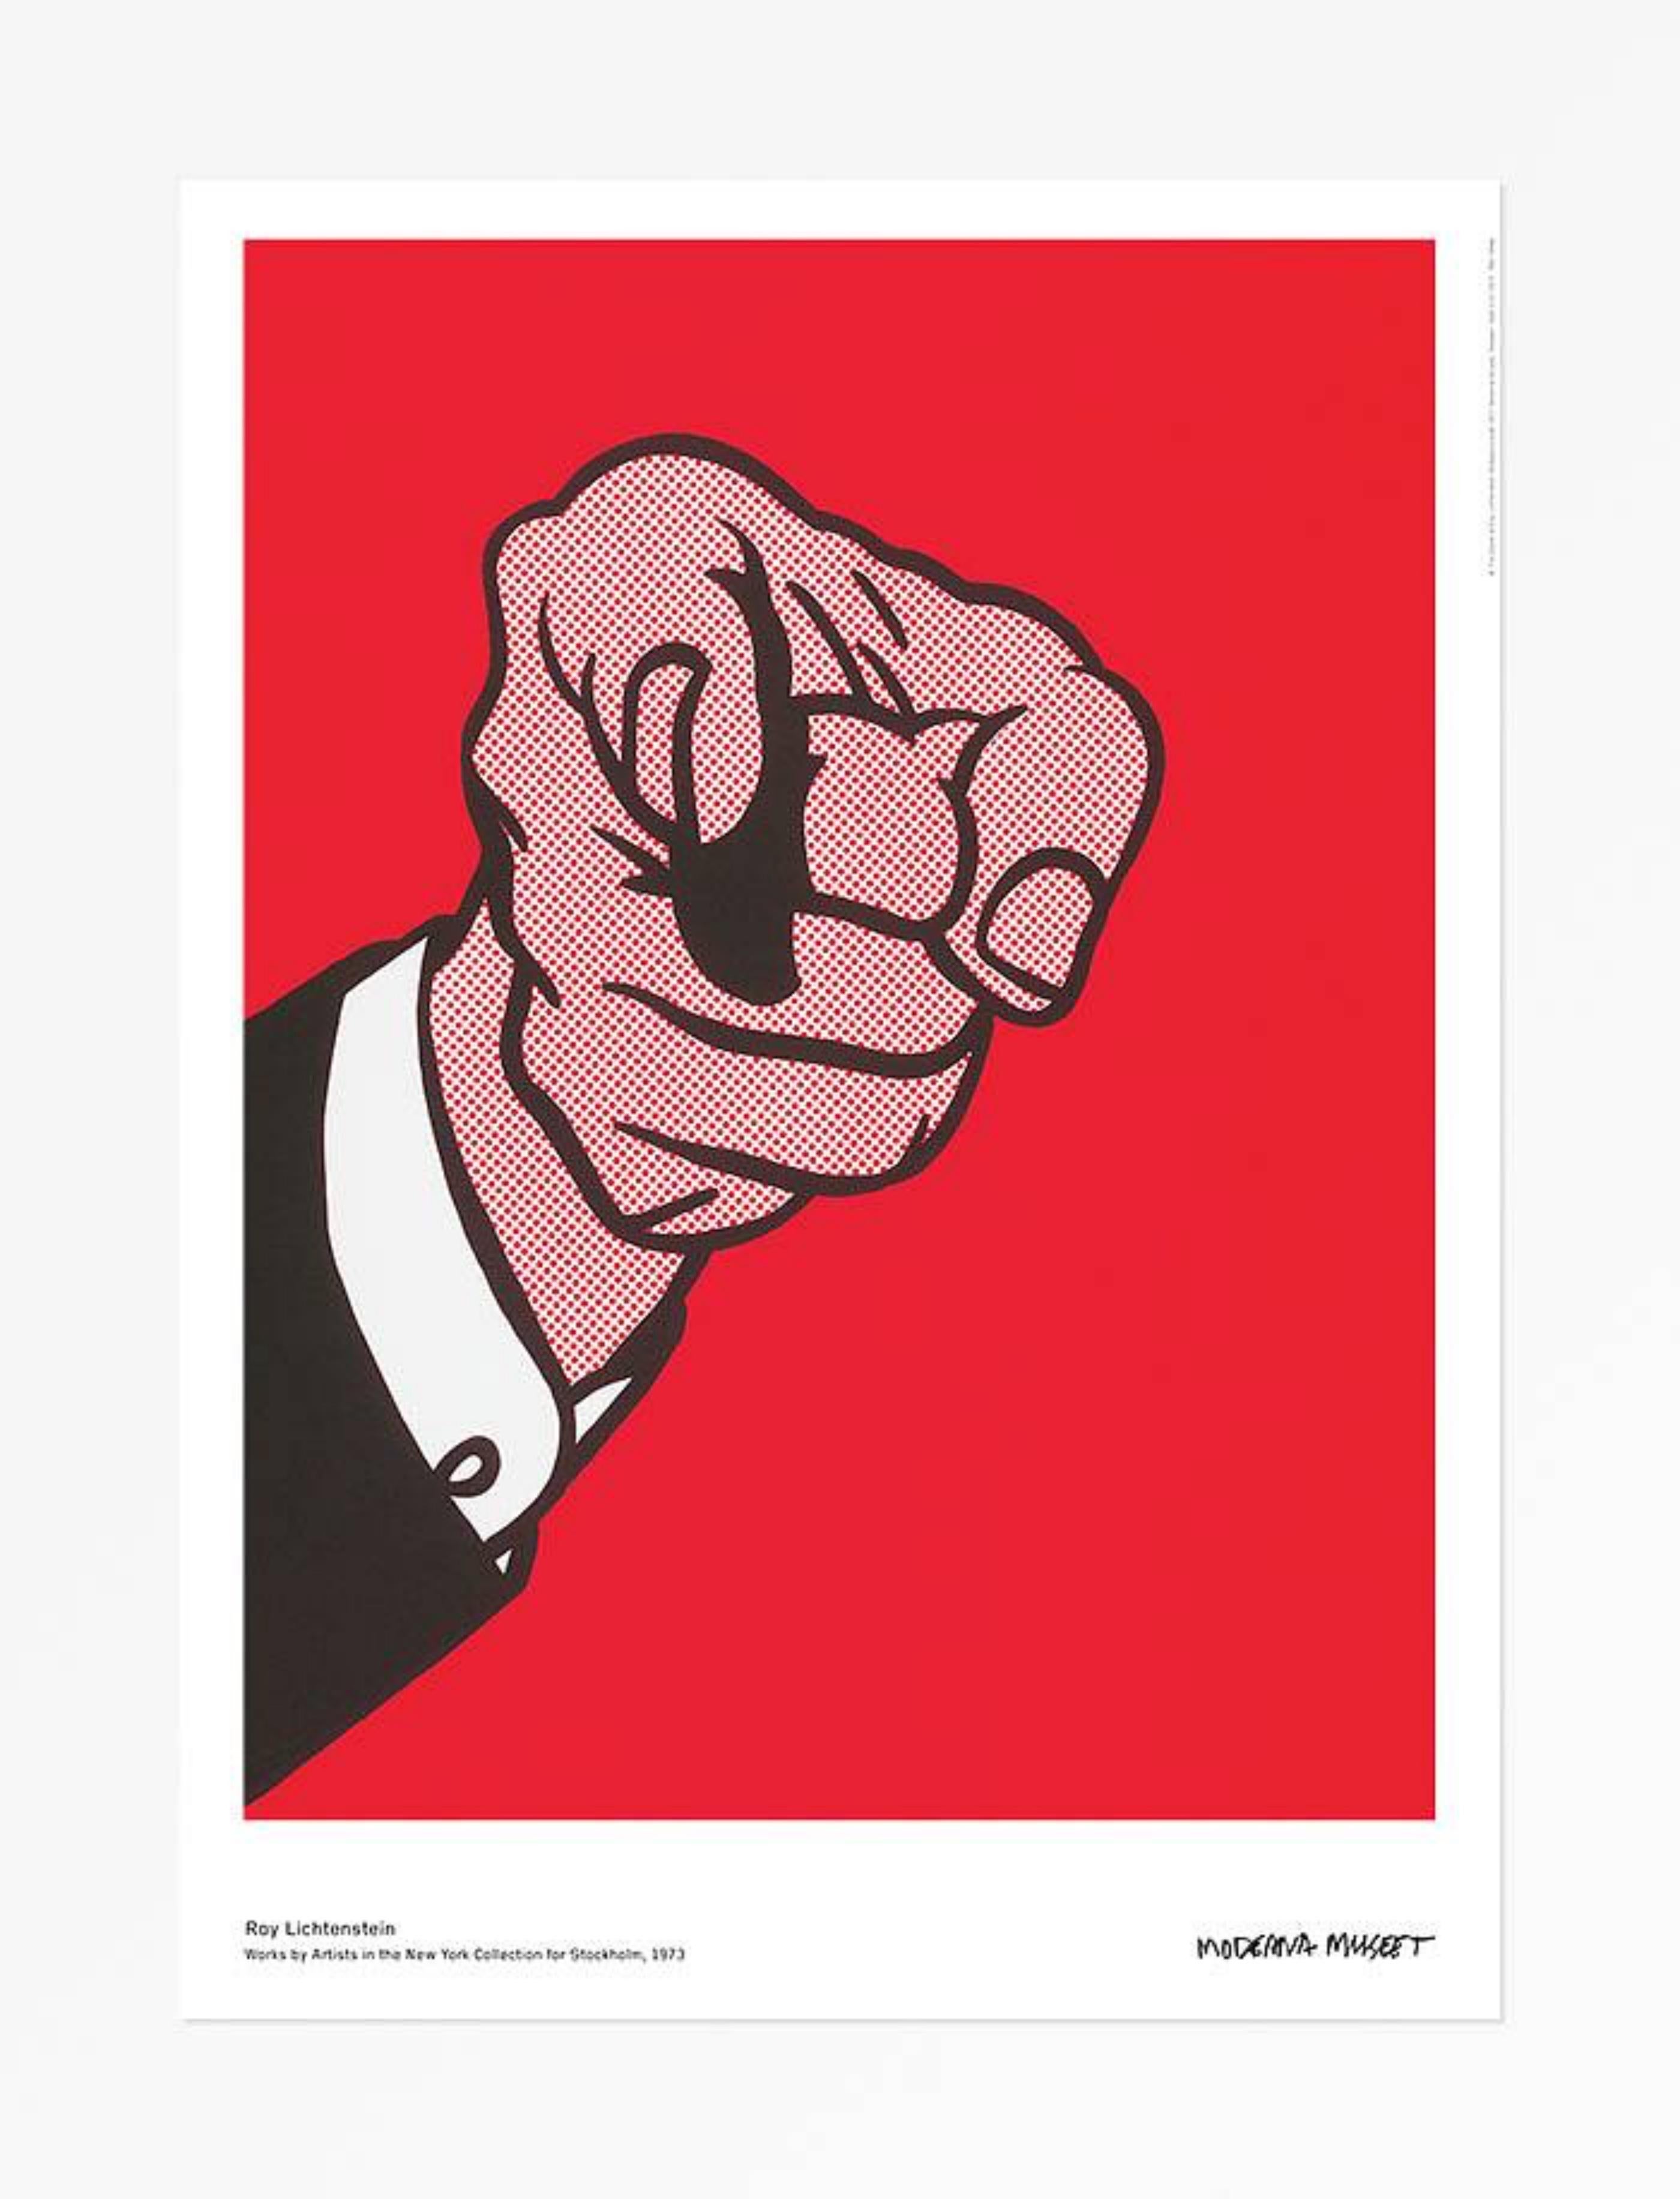 Finger Pointing, Works by Artists in the New York Collection for Stockholm, 1973 - Print by Roy Lichtenstein